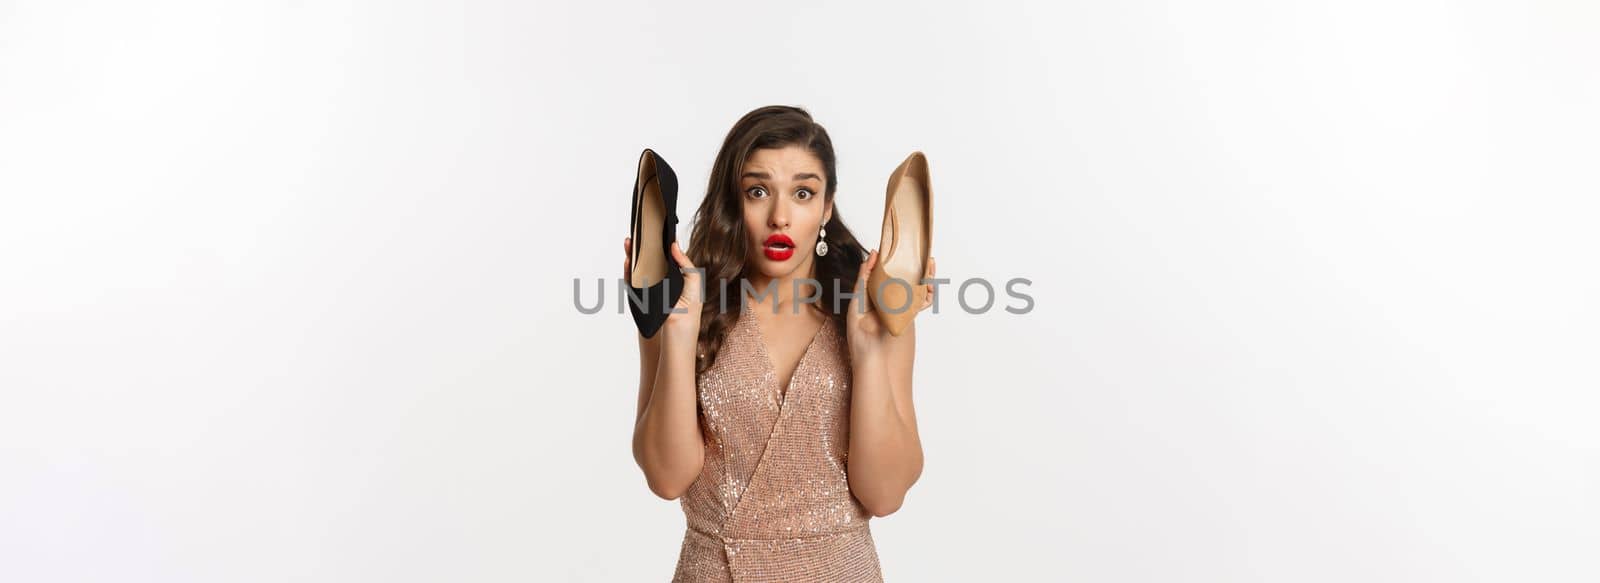 Party and celebration concept. Indecisive girlfriend showing two different heels, asking opinion, help with choice while picking outfit, standing over white background.